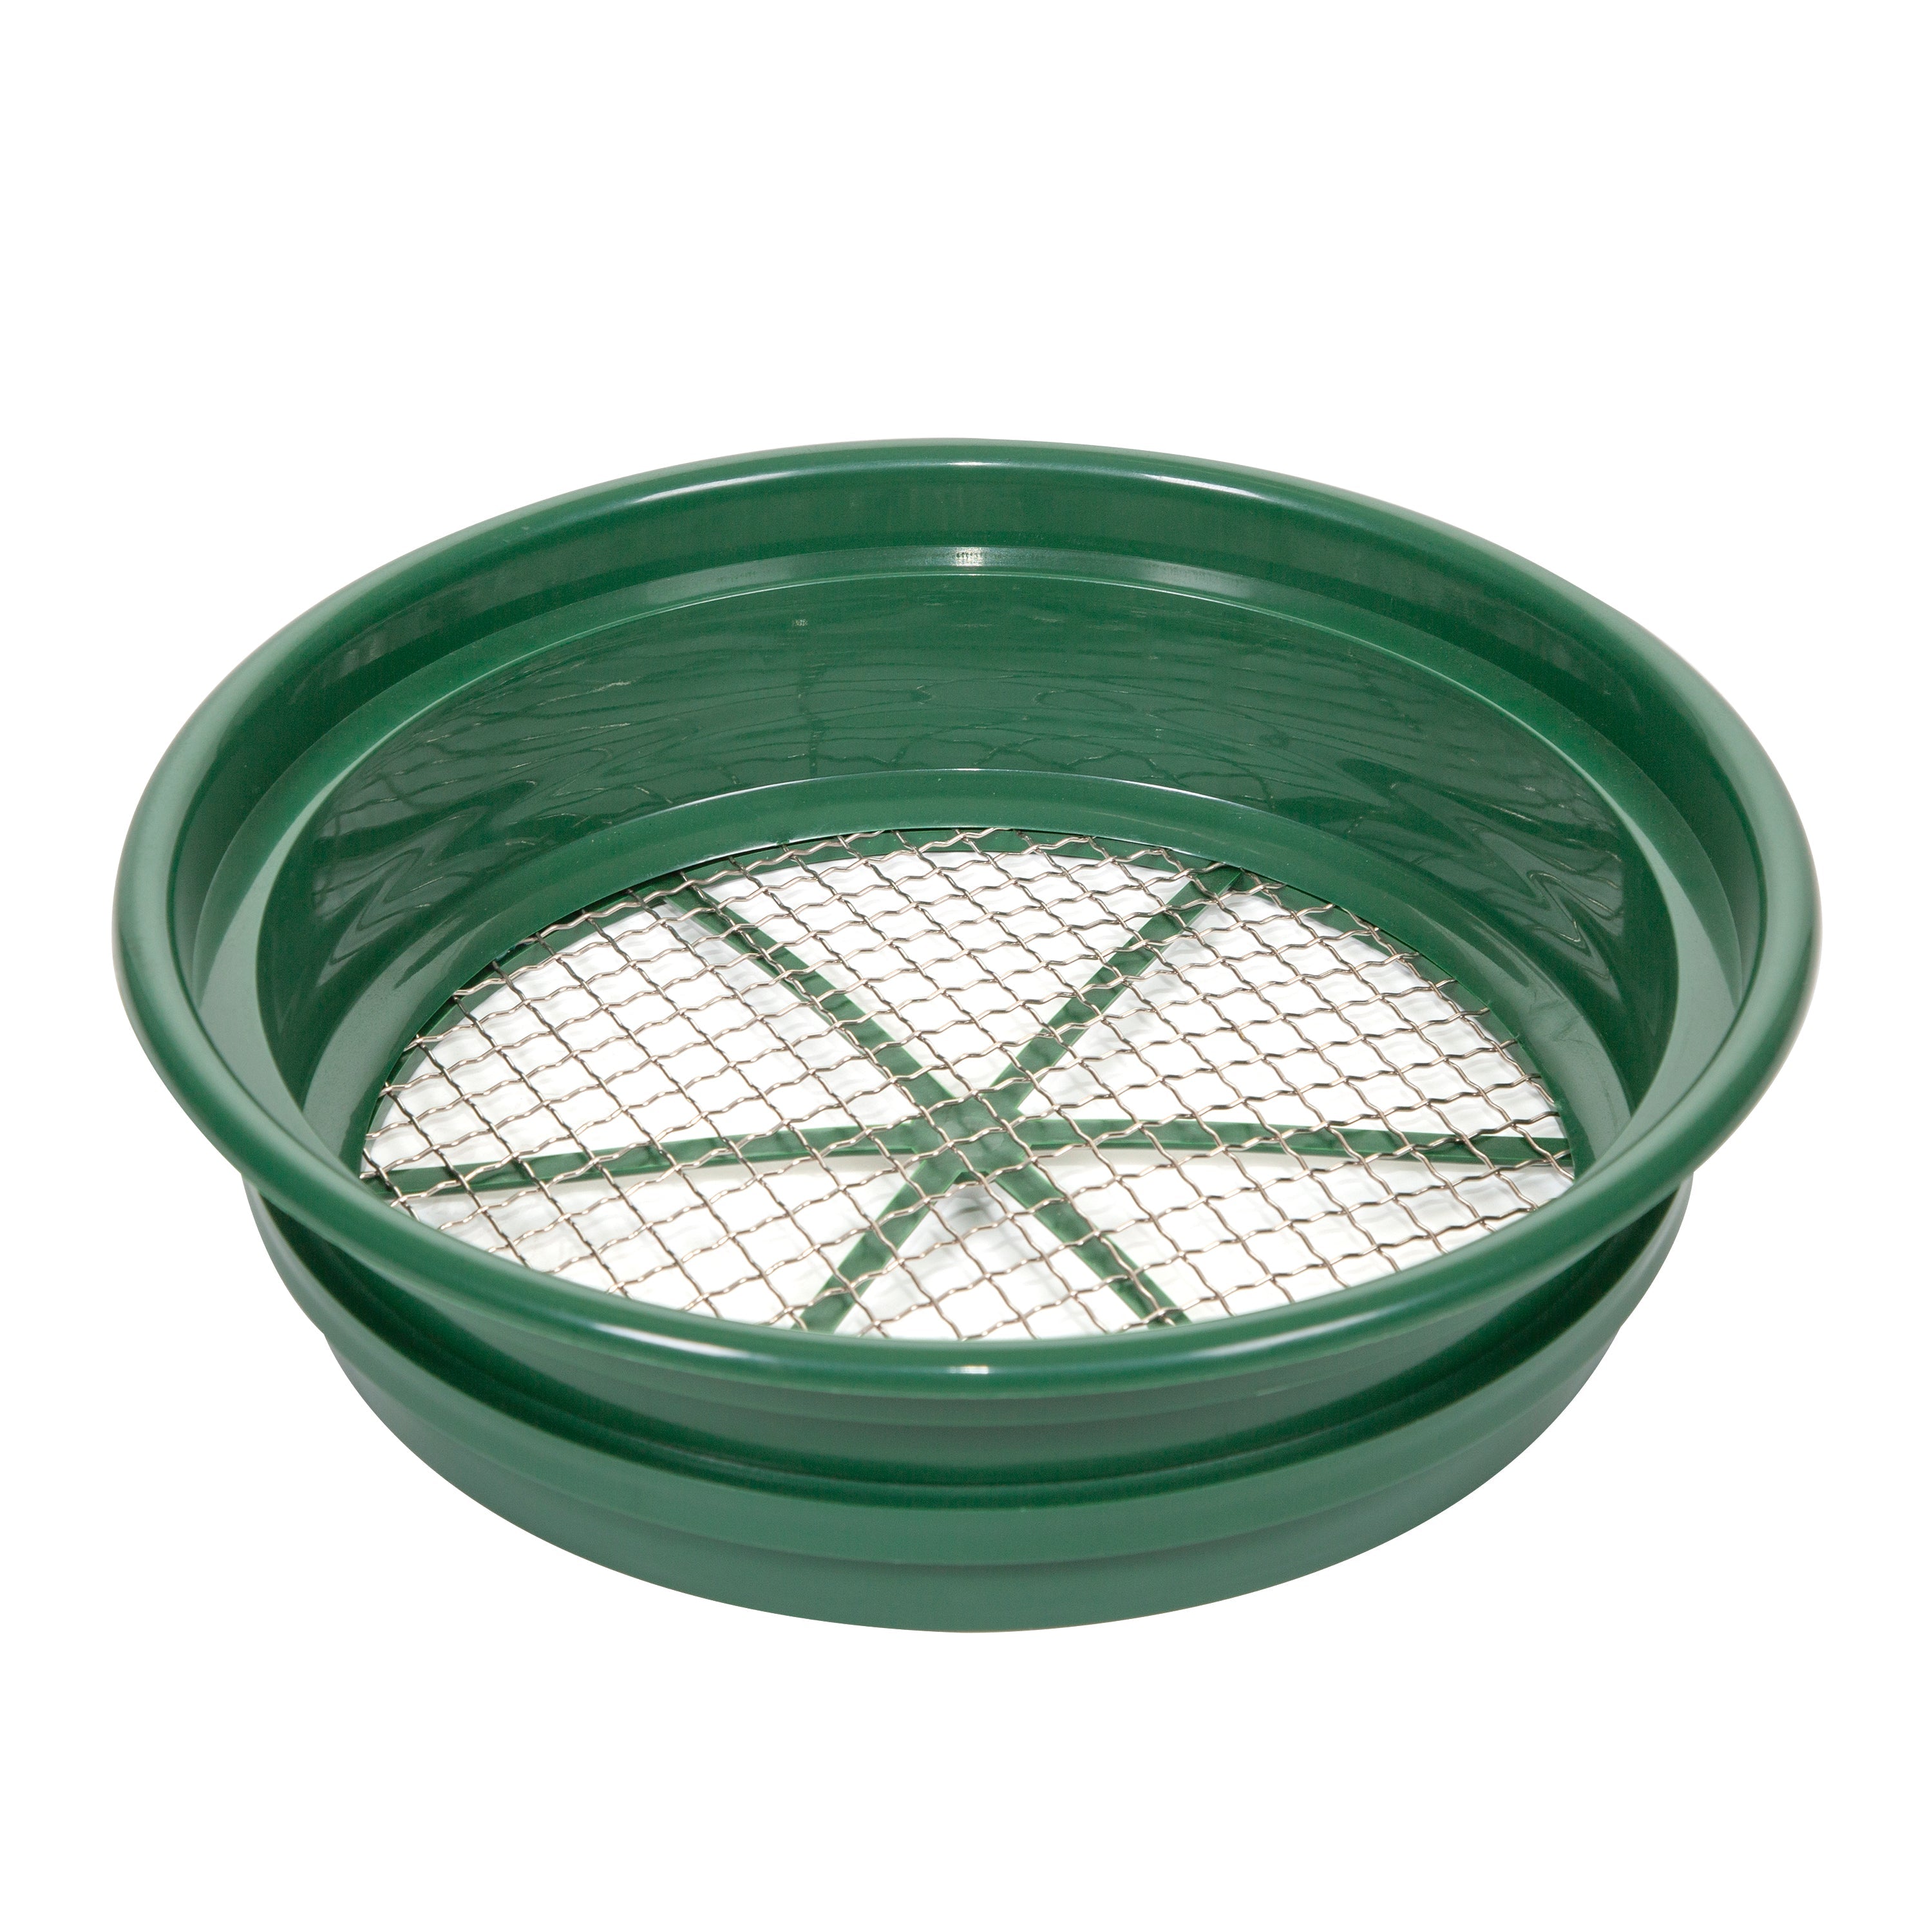 Classifier / Sifter Pan - 1/2 Inch Stainless Mesh